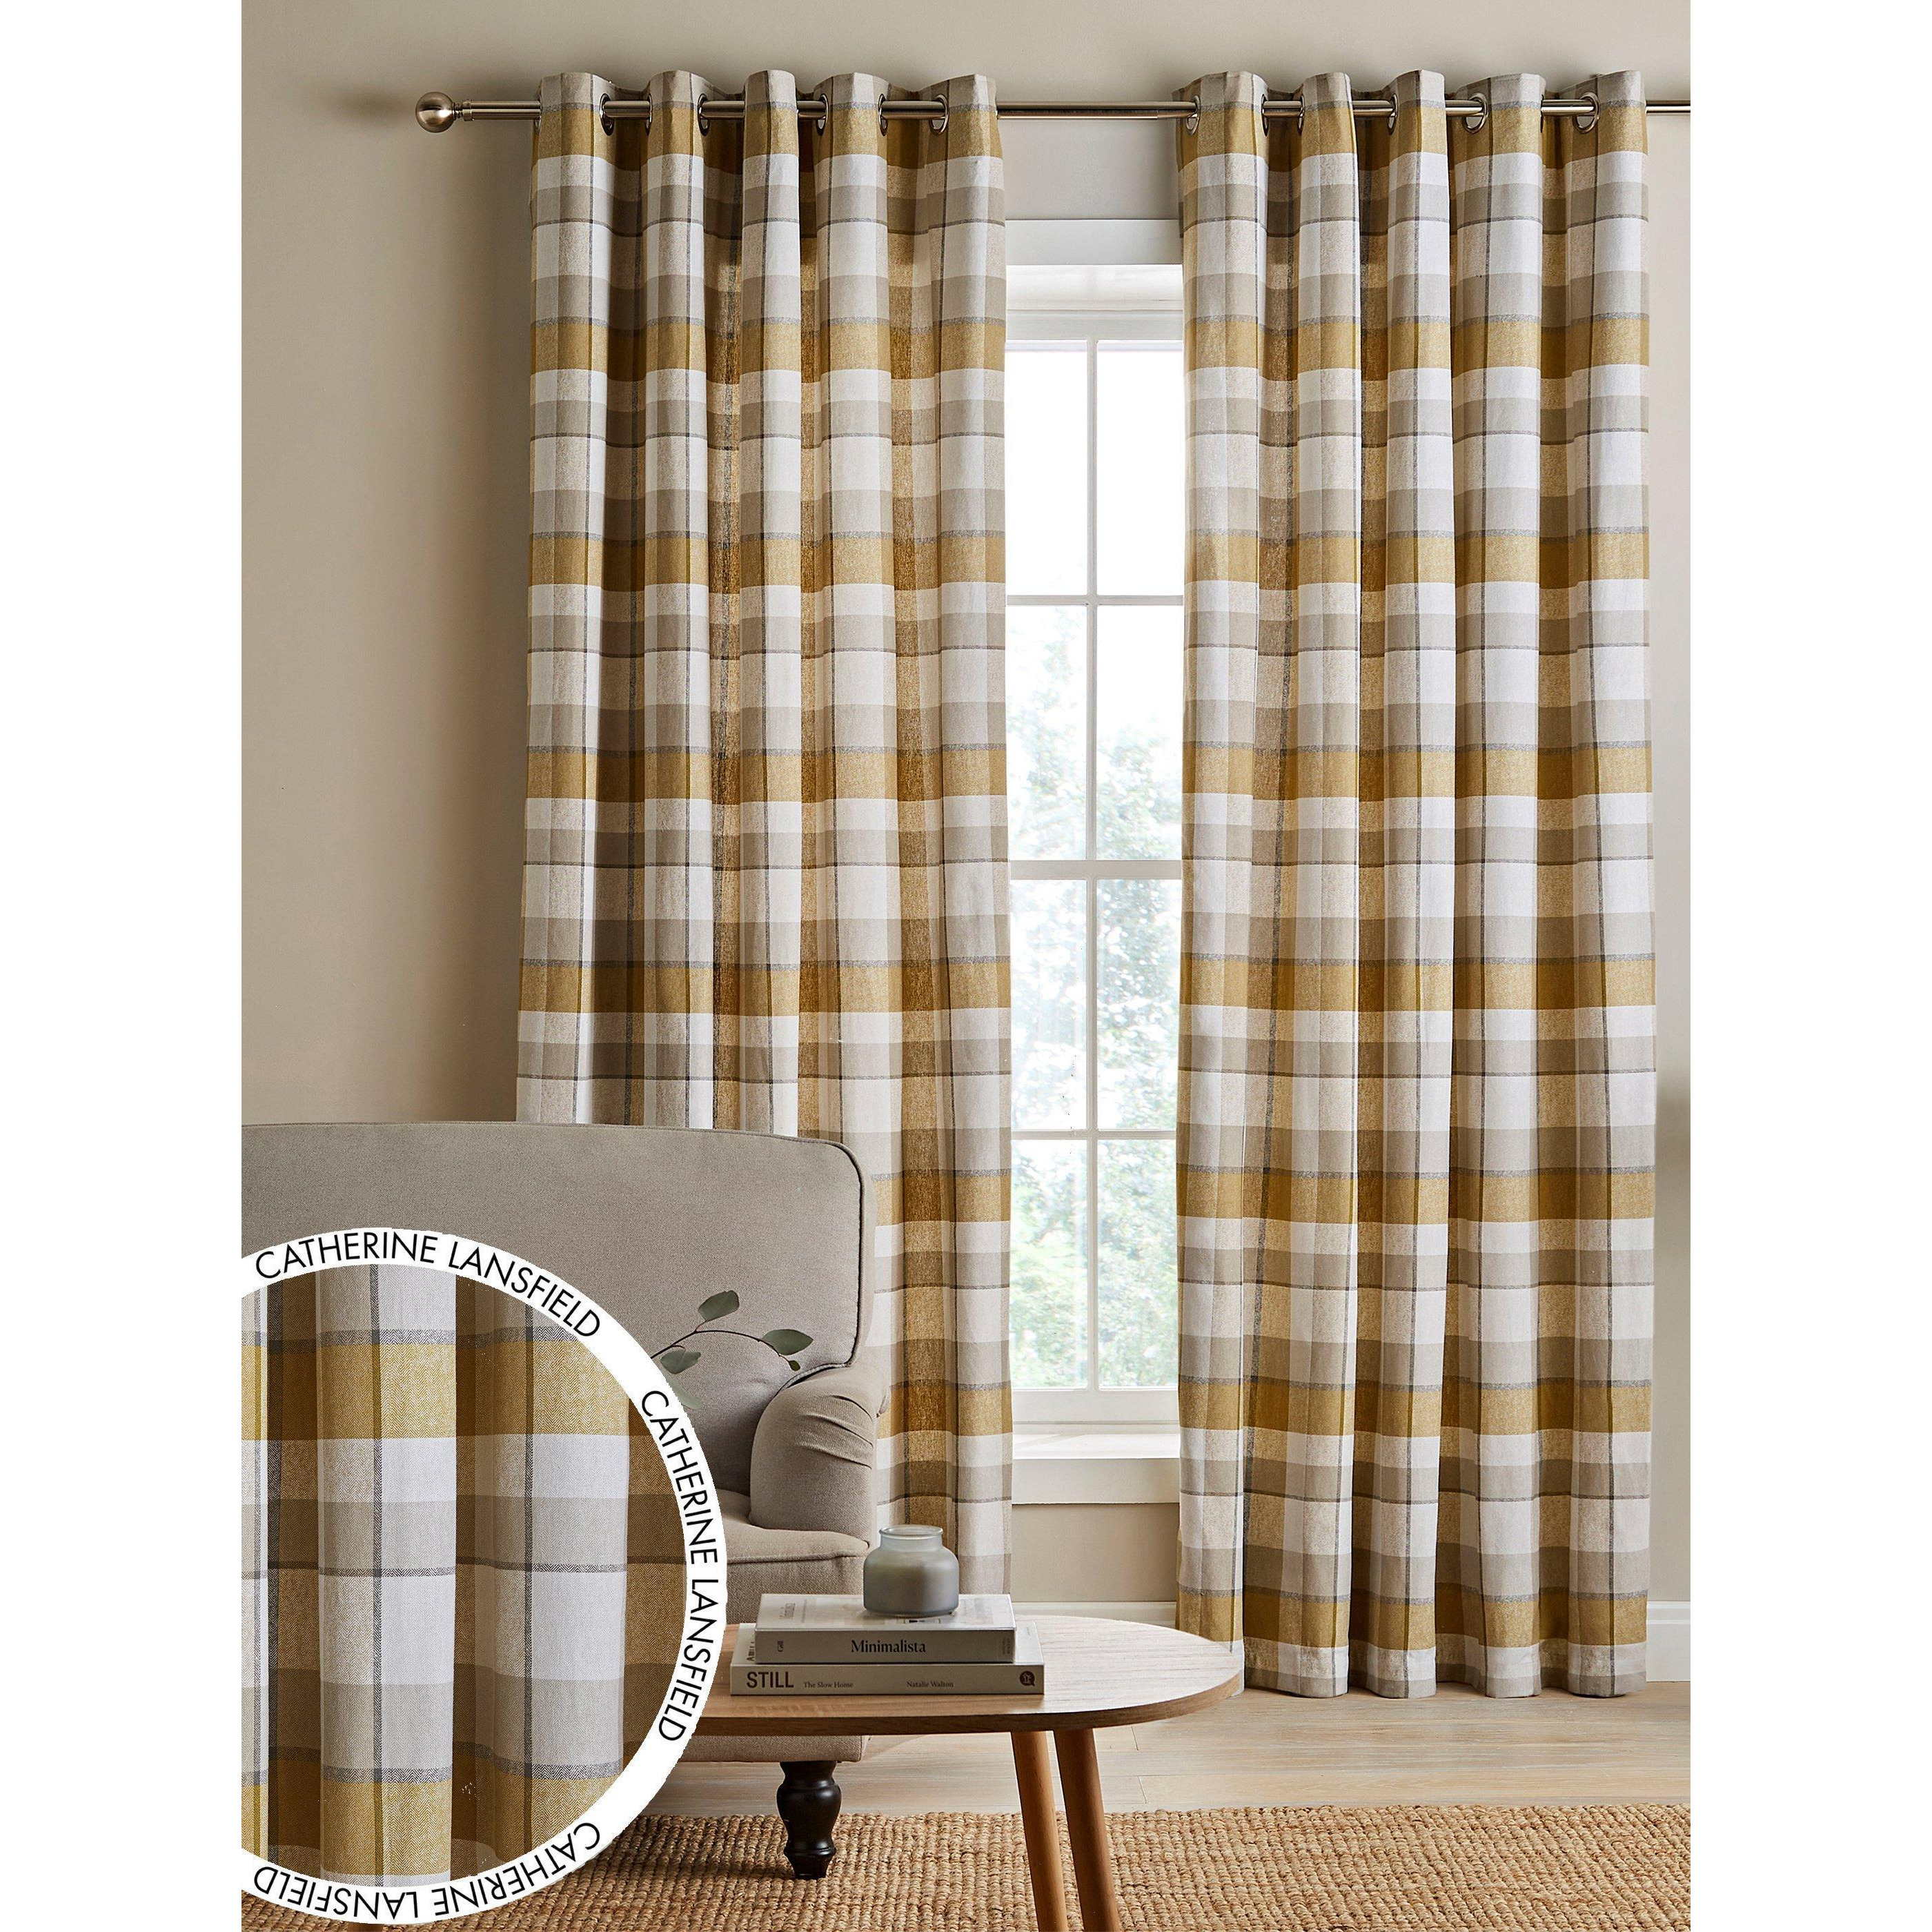 'Brushed Cotton Thermal Check ' Curtains Two Panels - image 1